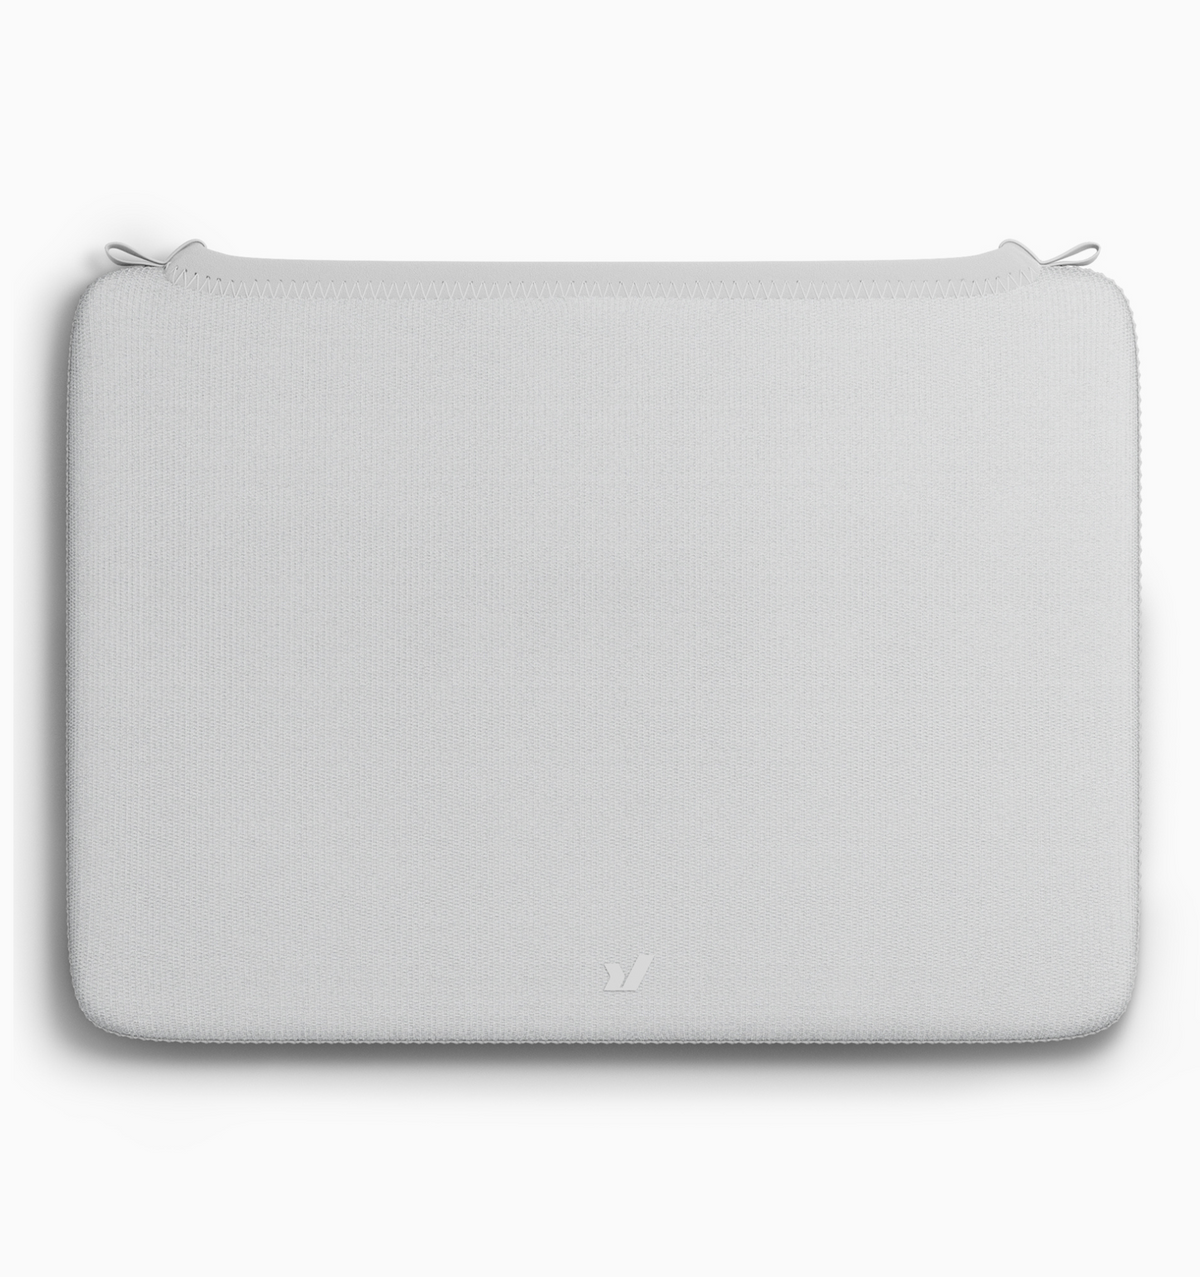 Rushfaster Laptop Sleeve For 13" MacBook Air/Pro - White